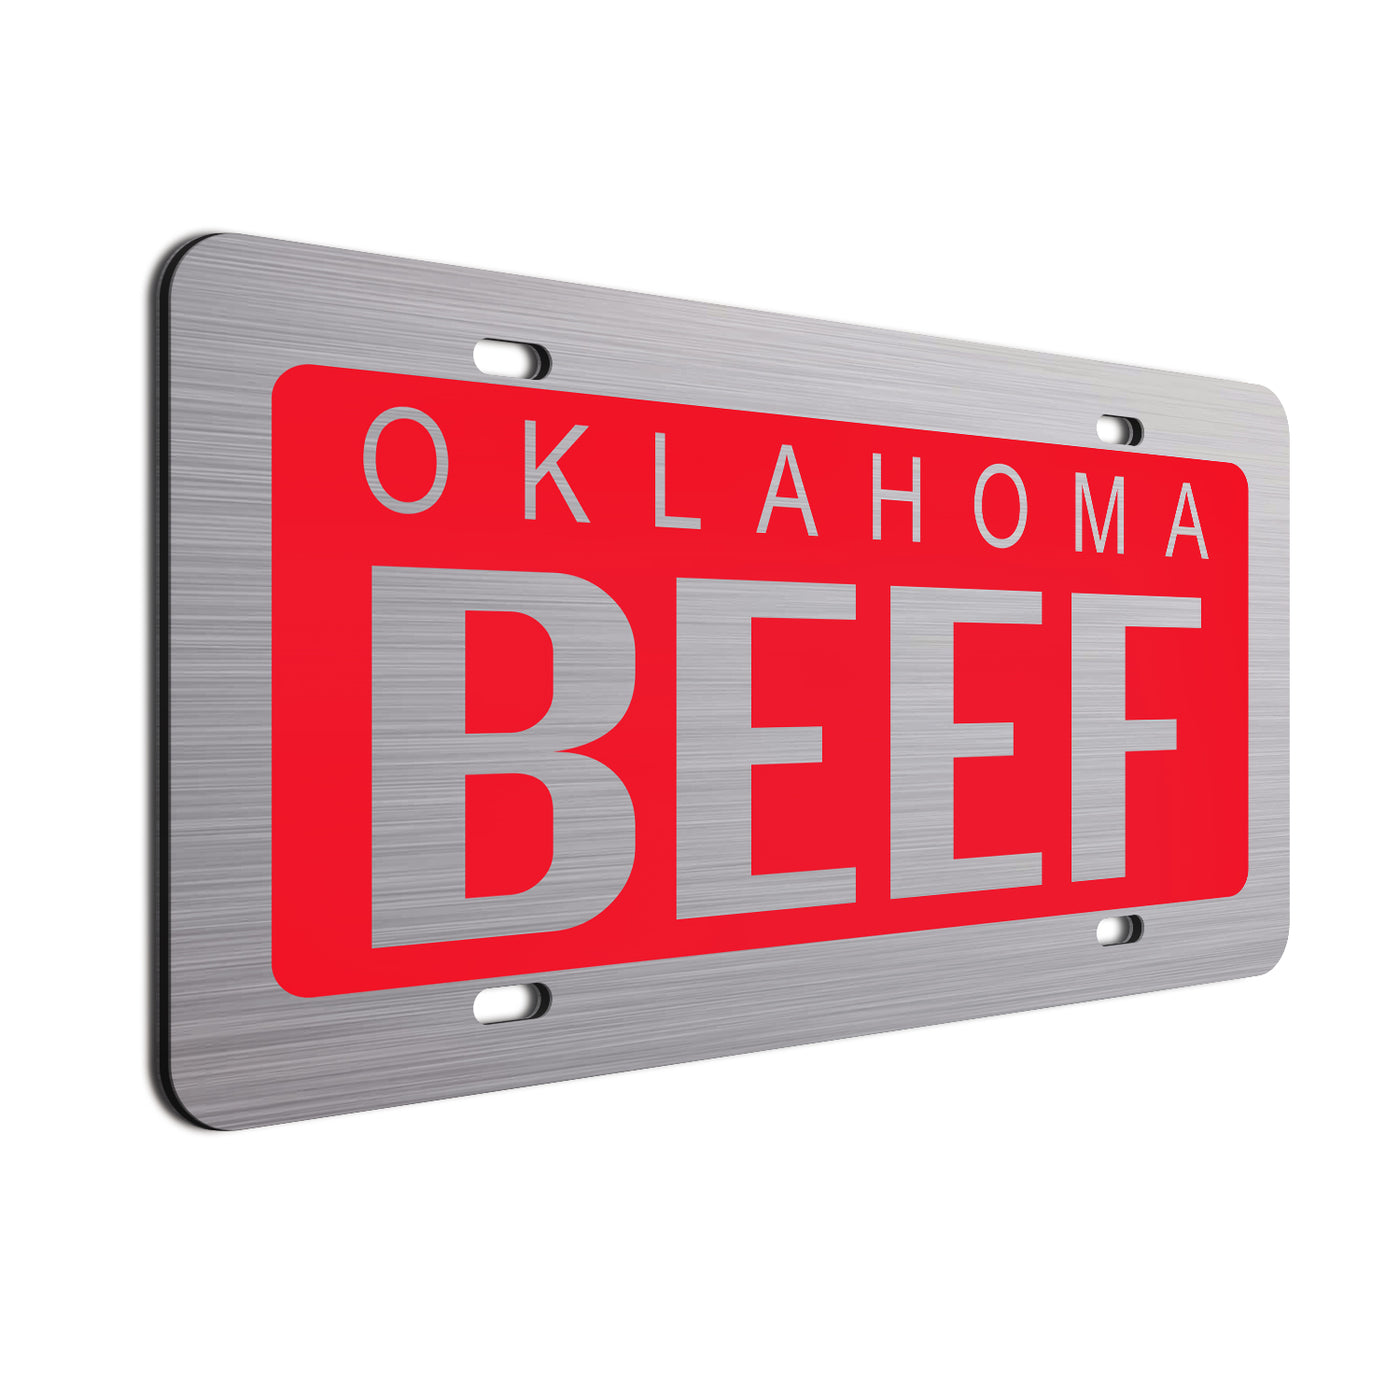 Oklahoma Beef Car License Plate Silver